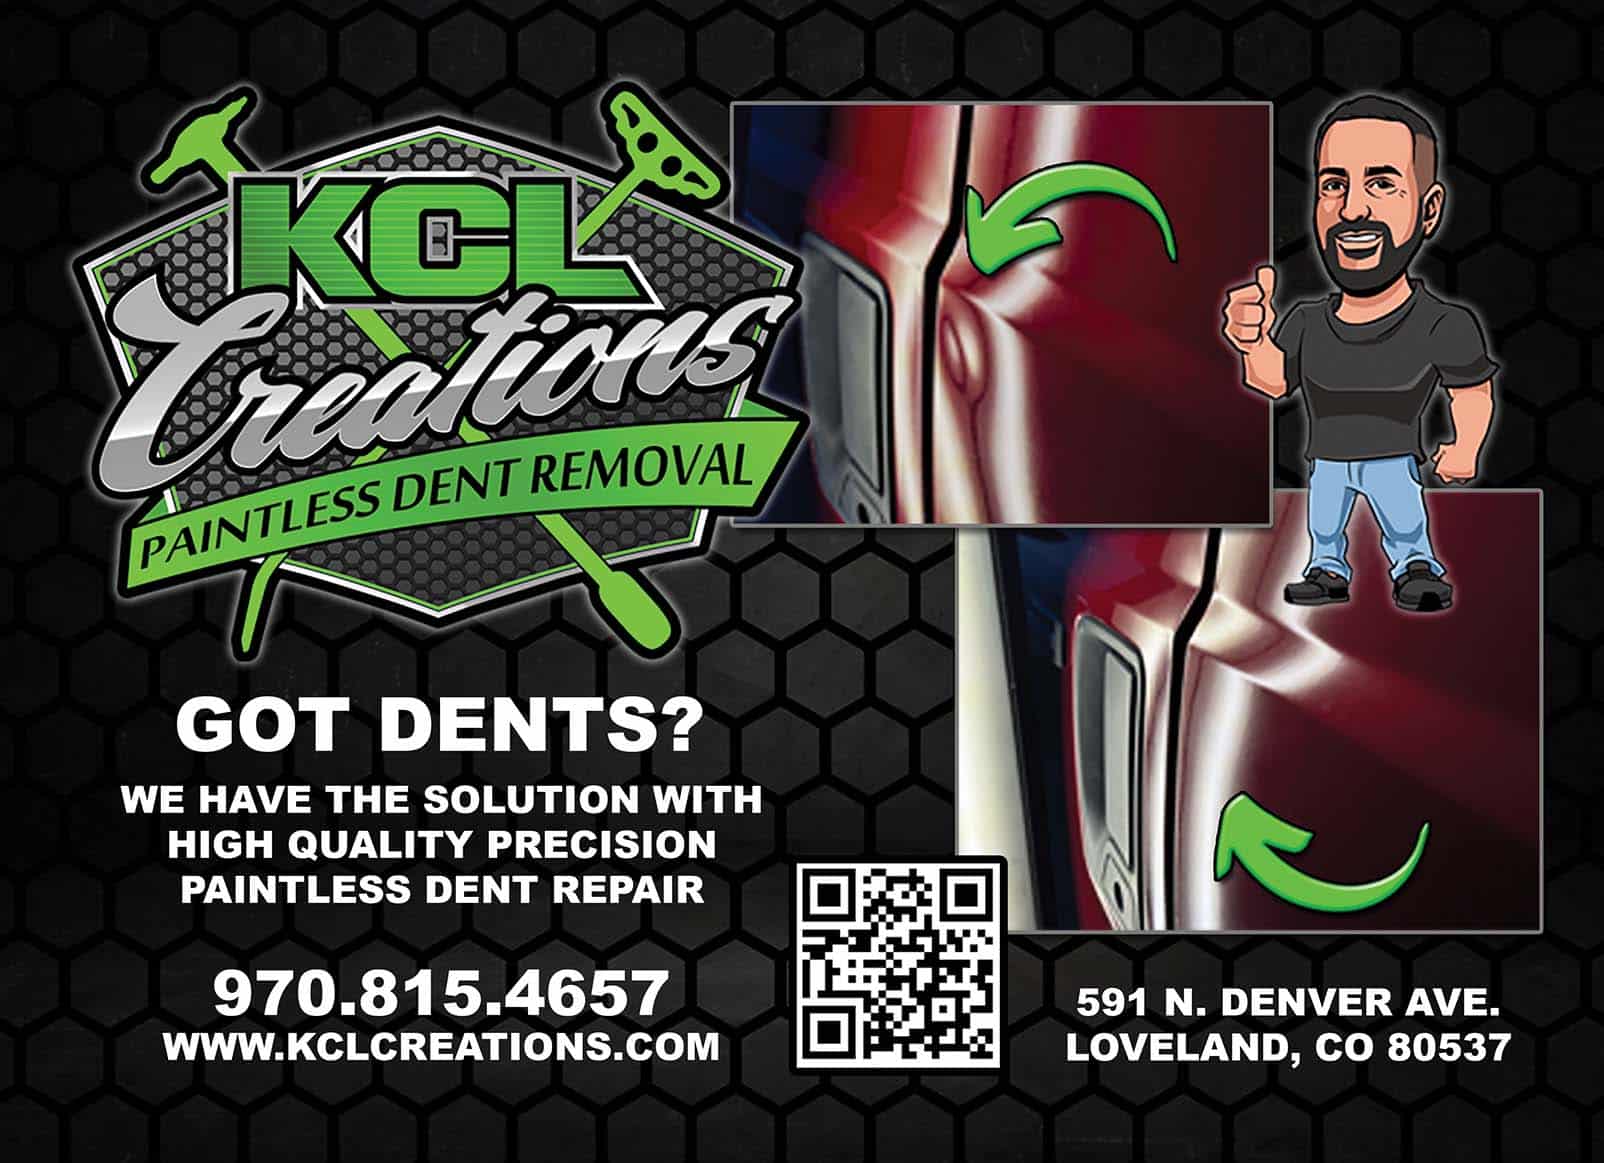 KCL Creations Paintless Dent Removal